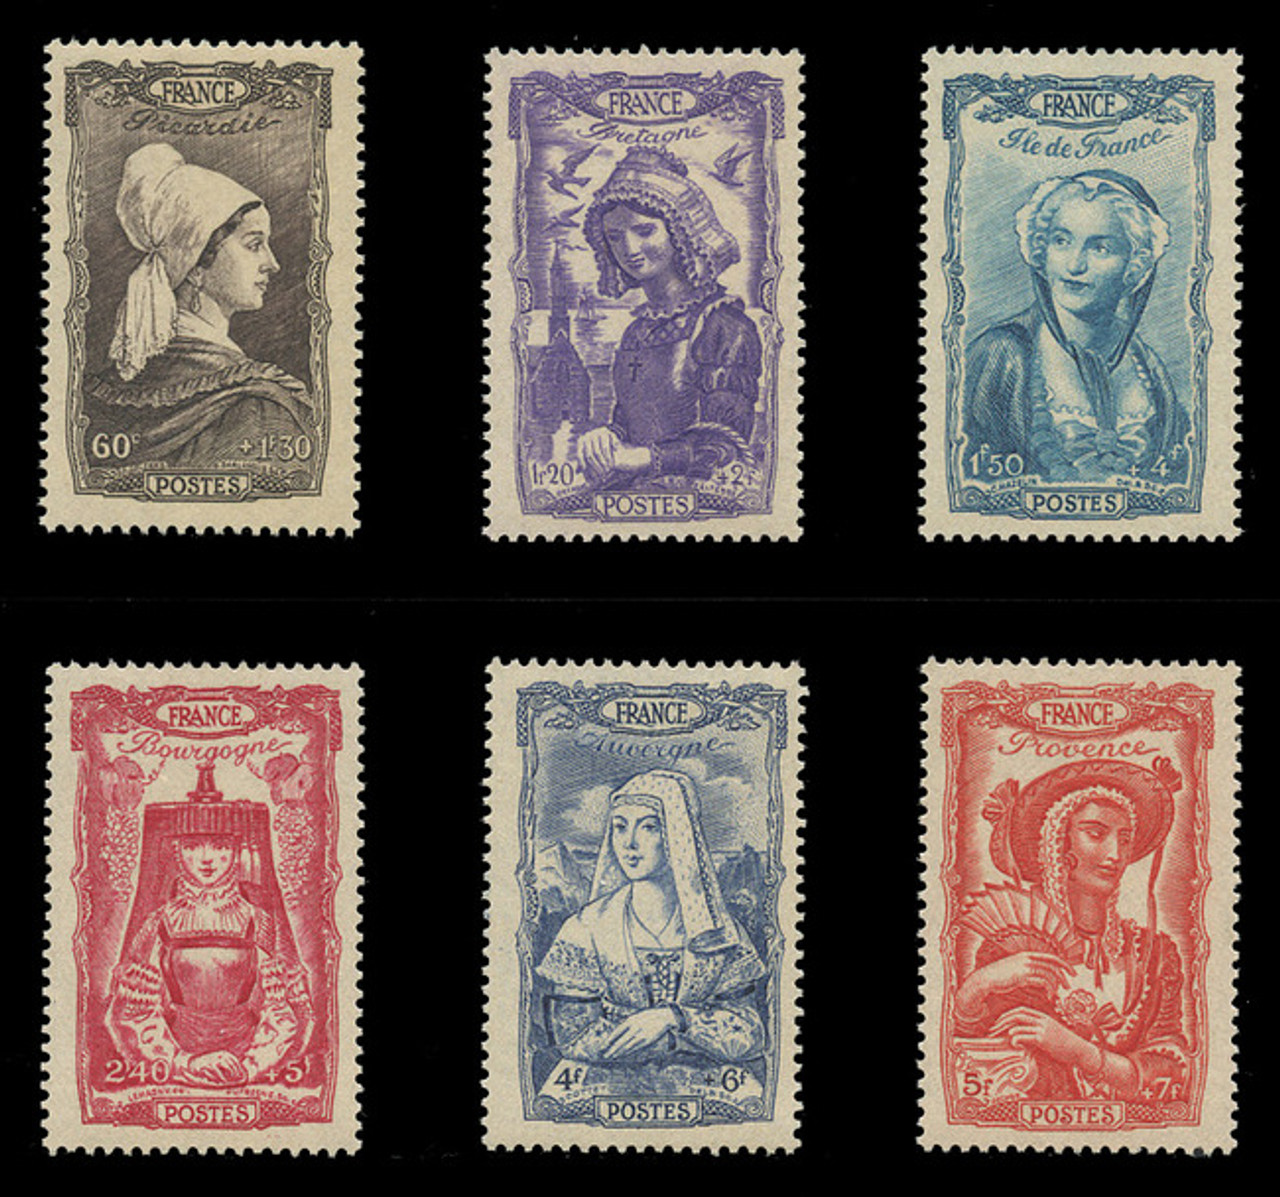 FRANCE Scott # B 167-72, 1943 National Relief, 18th Century Costumes (Set of 6)